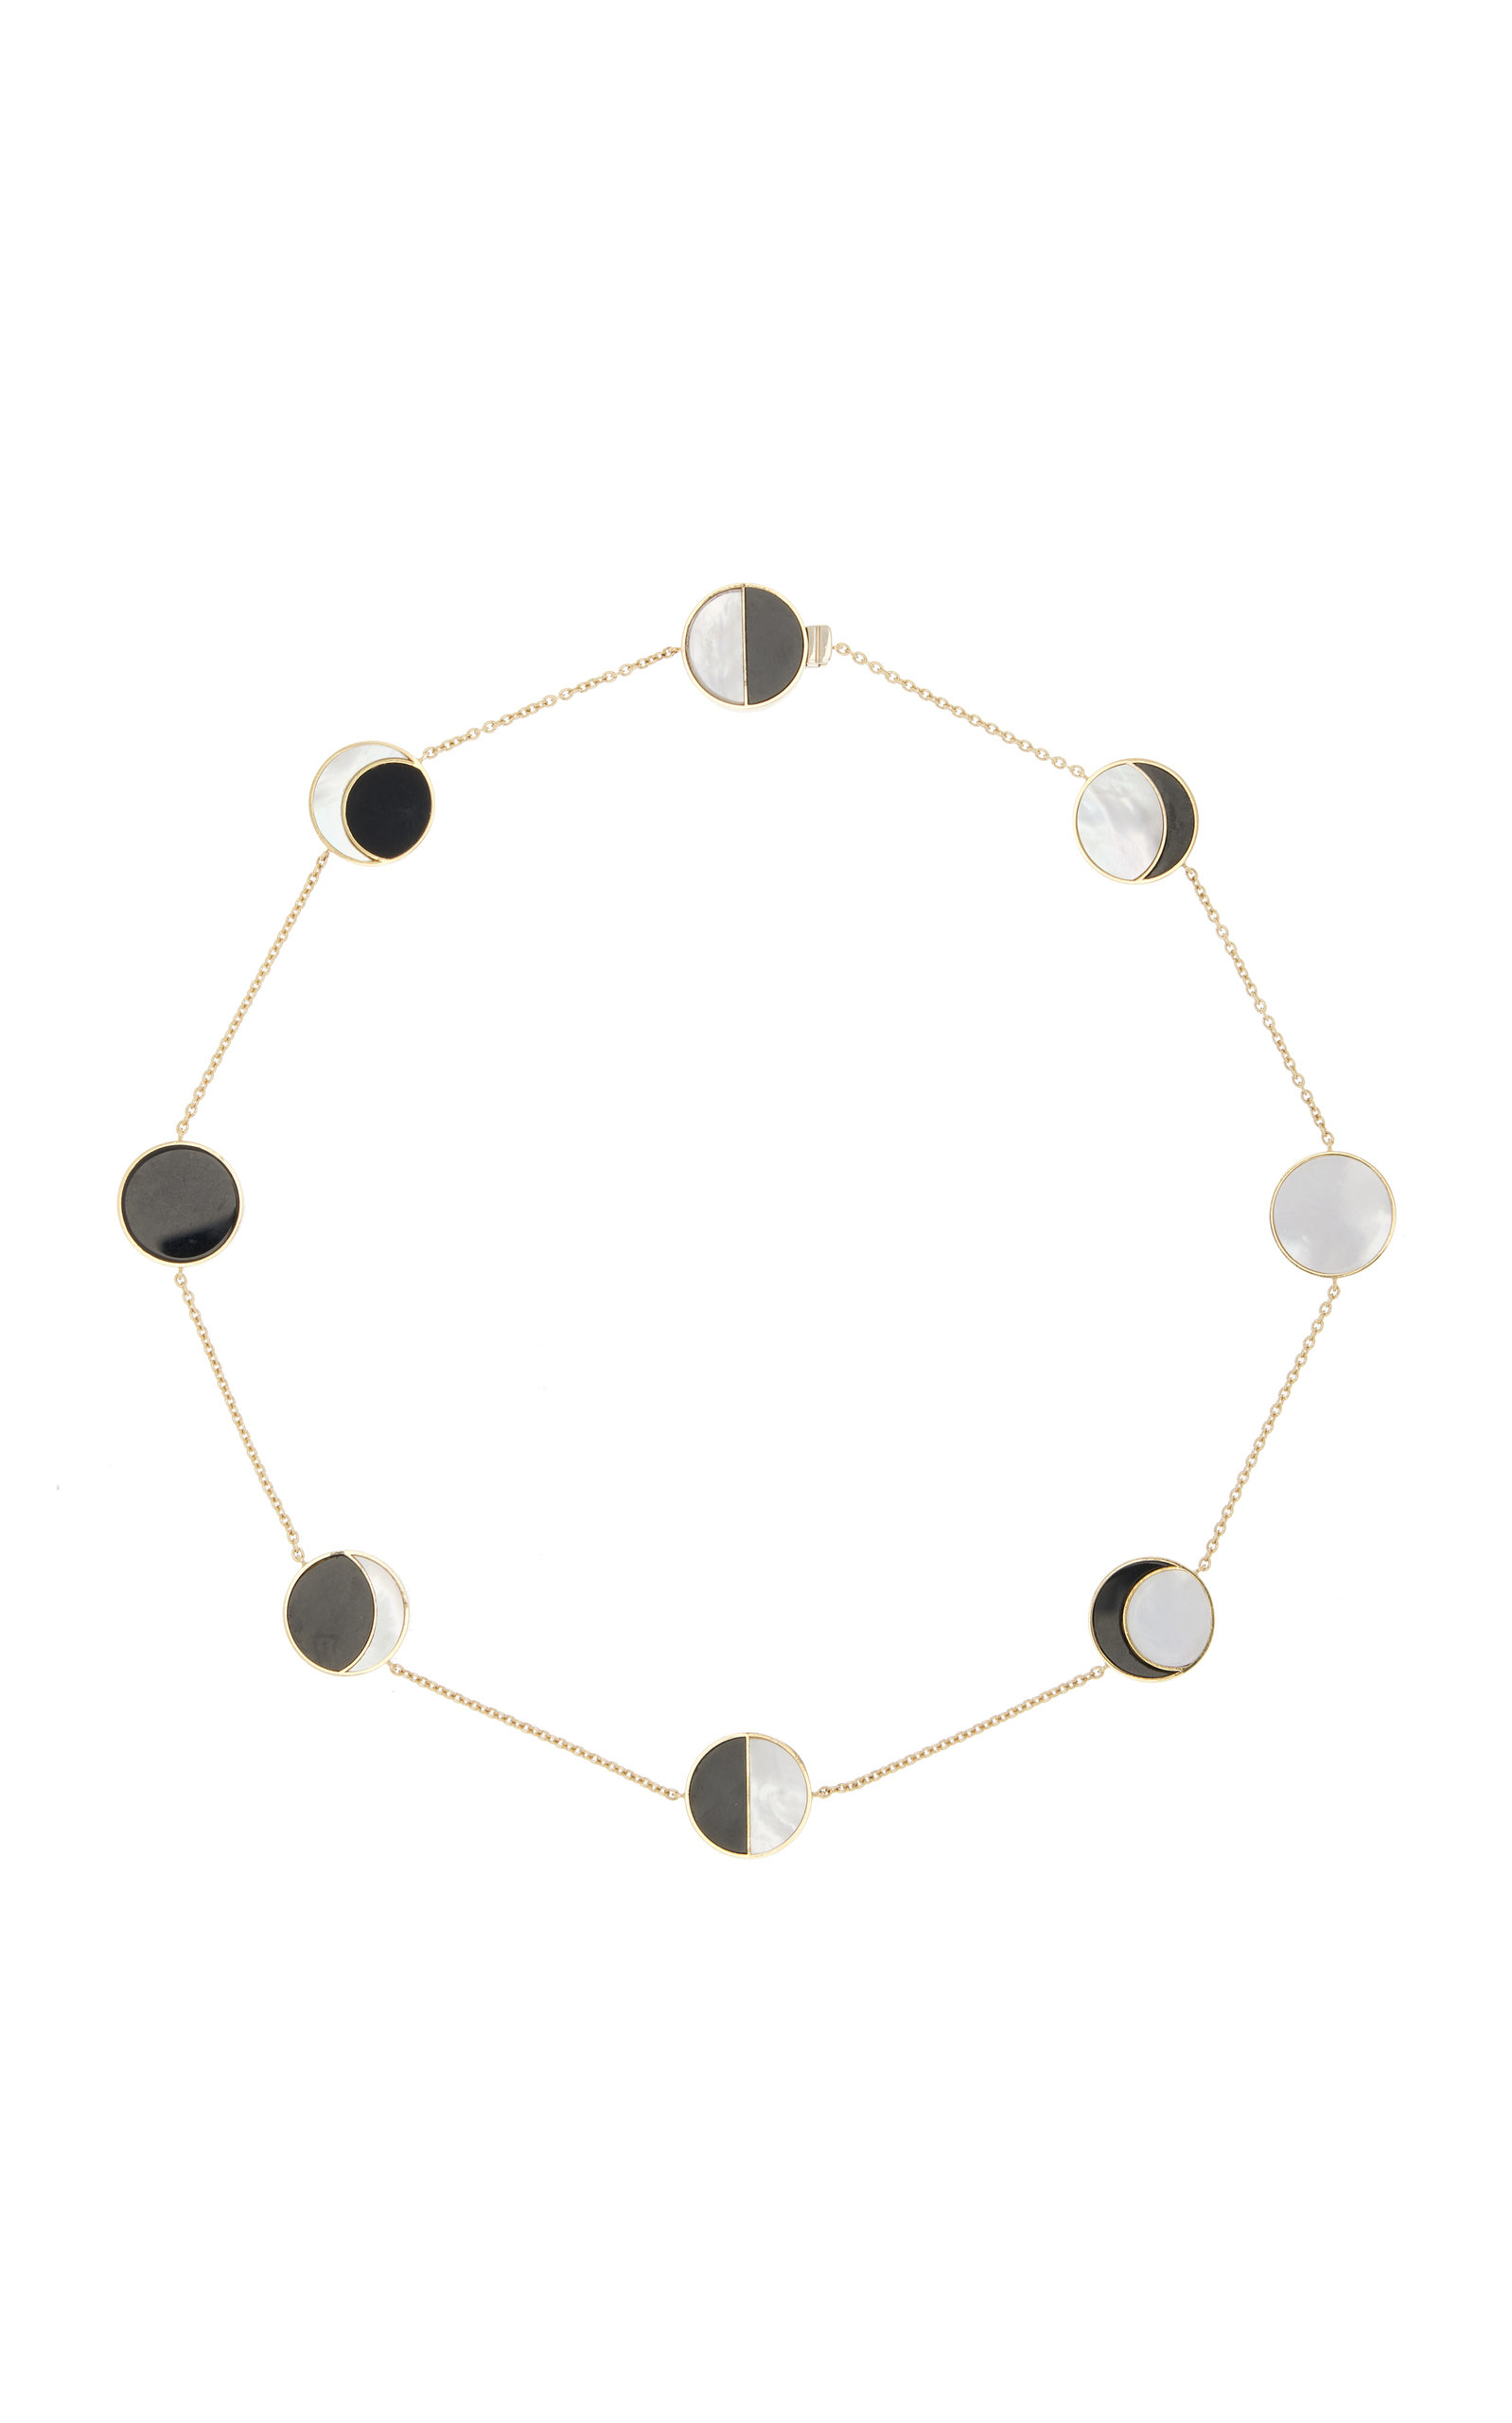 DANIELLE MARKS ECLIPSE 18K YELLOW GOLD ONYX; MOTHER-OF-PEARL NECKLACE